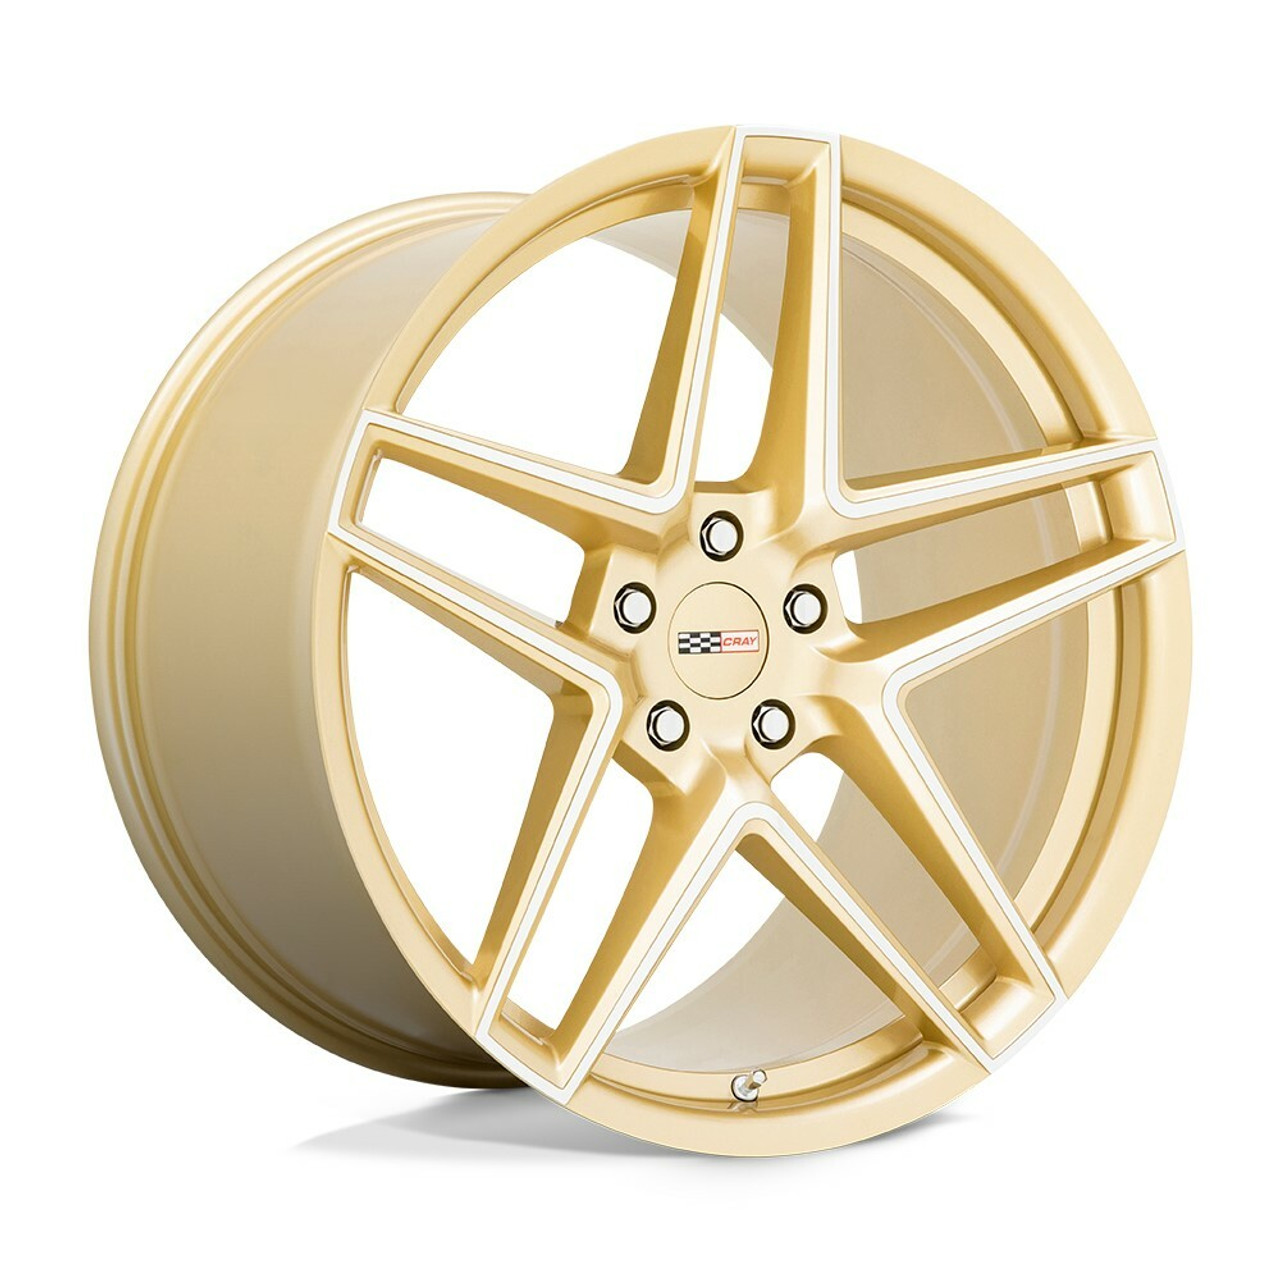 Cray Panthera 20x11.5 5x120 Gloss Gold Mirror Face Wheel 20" 52mm For Corvette